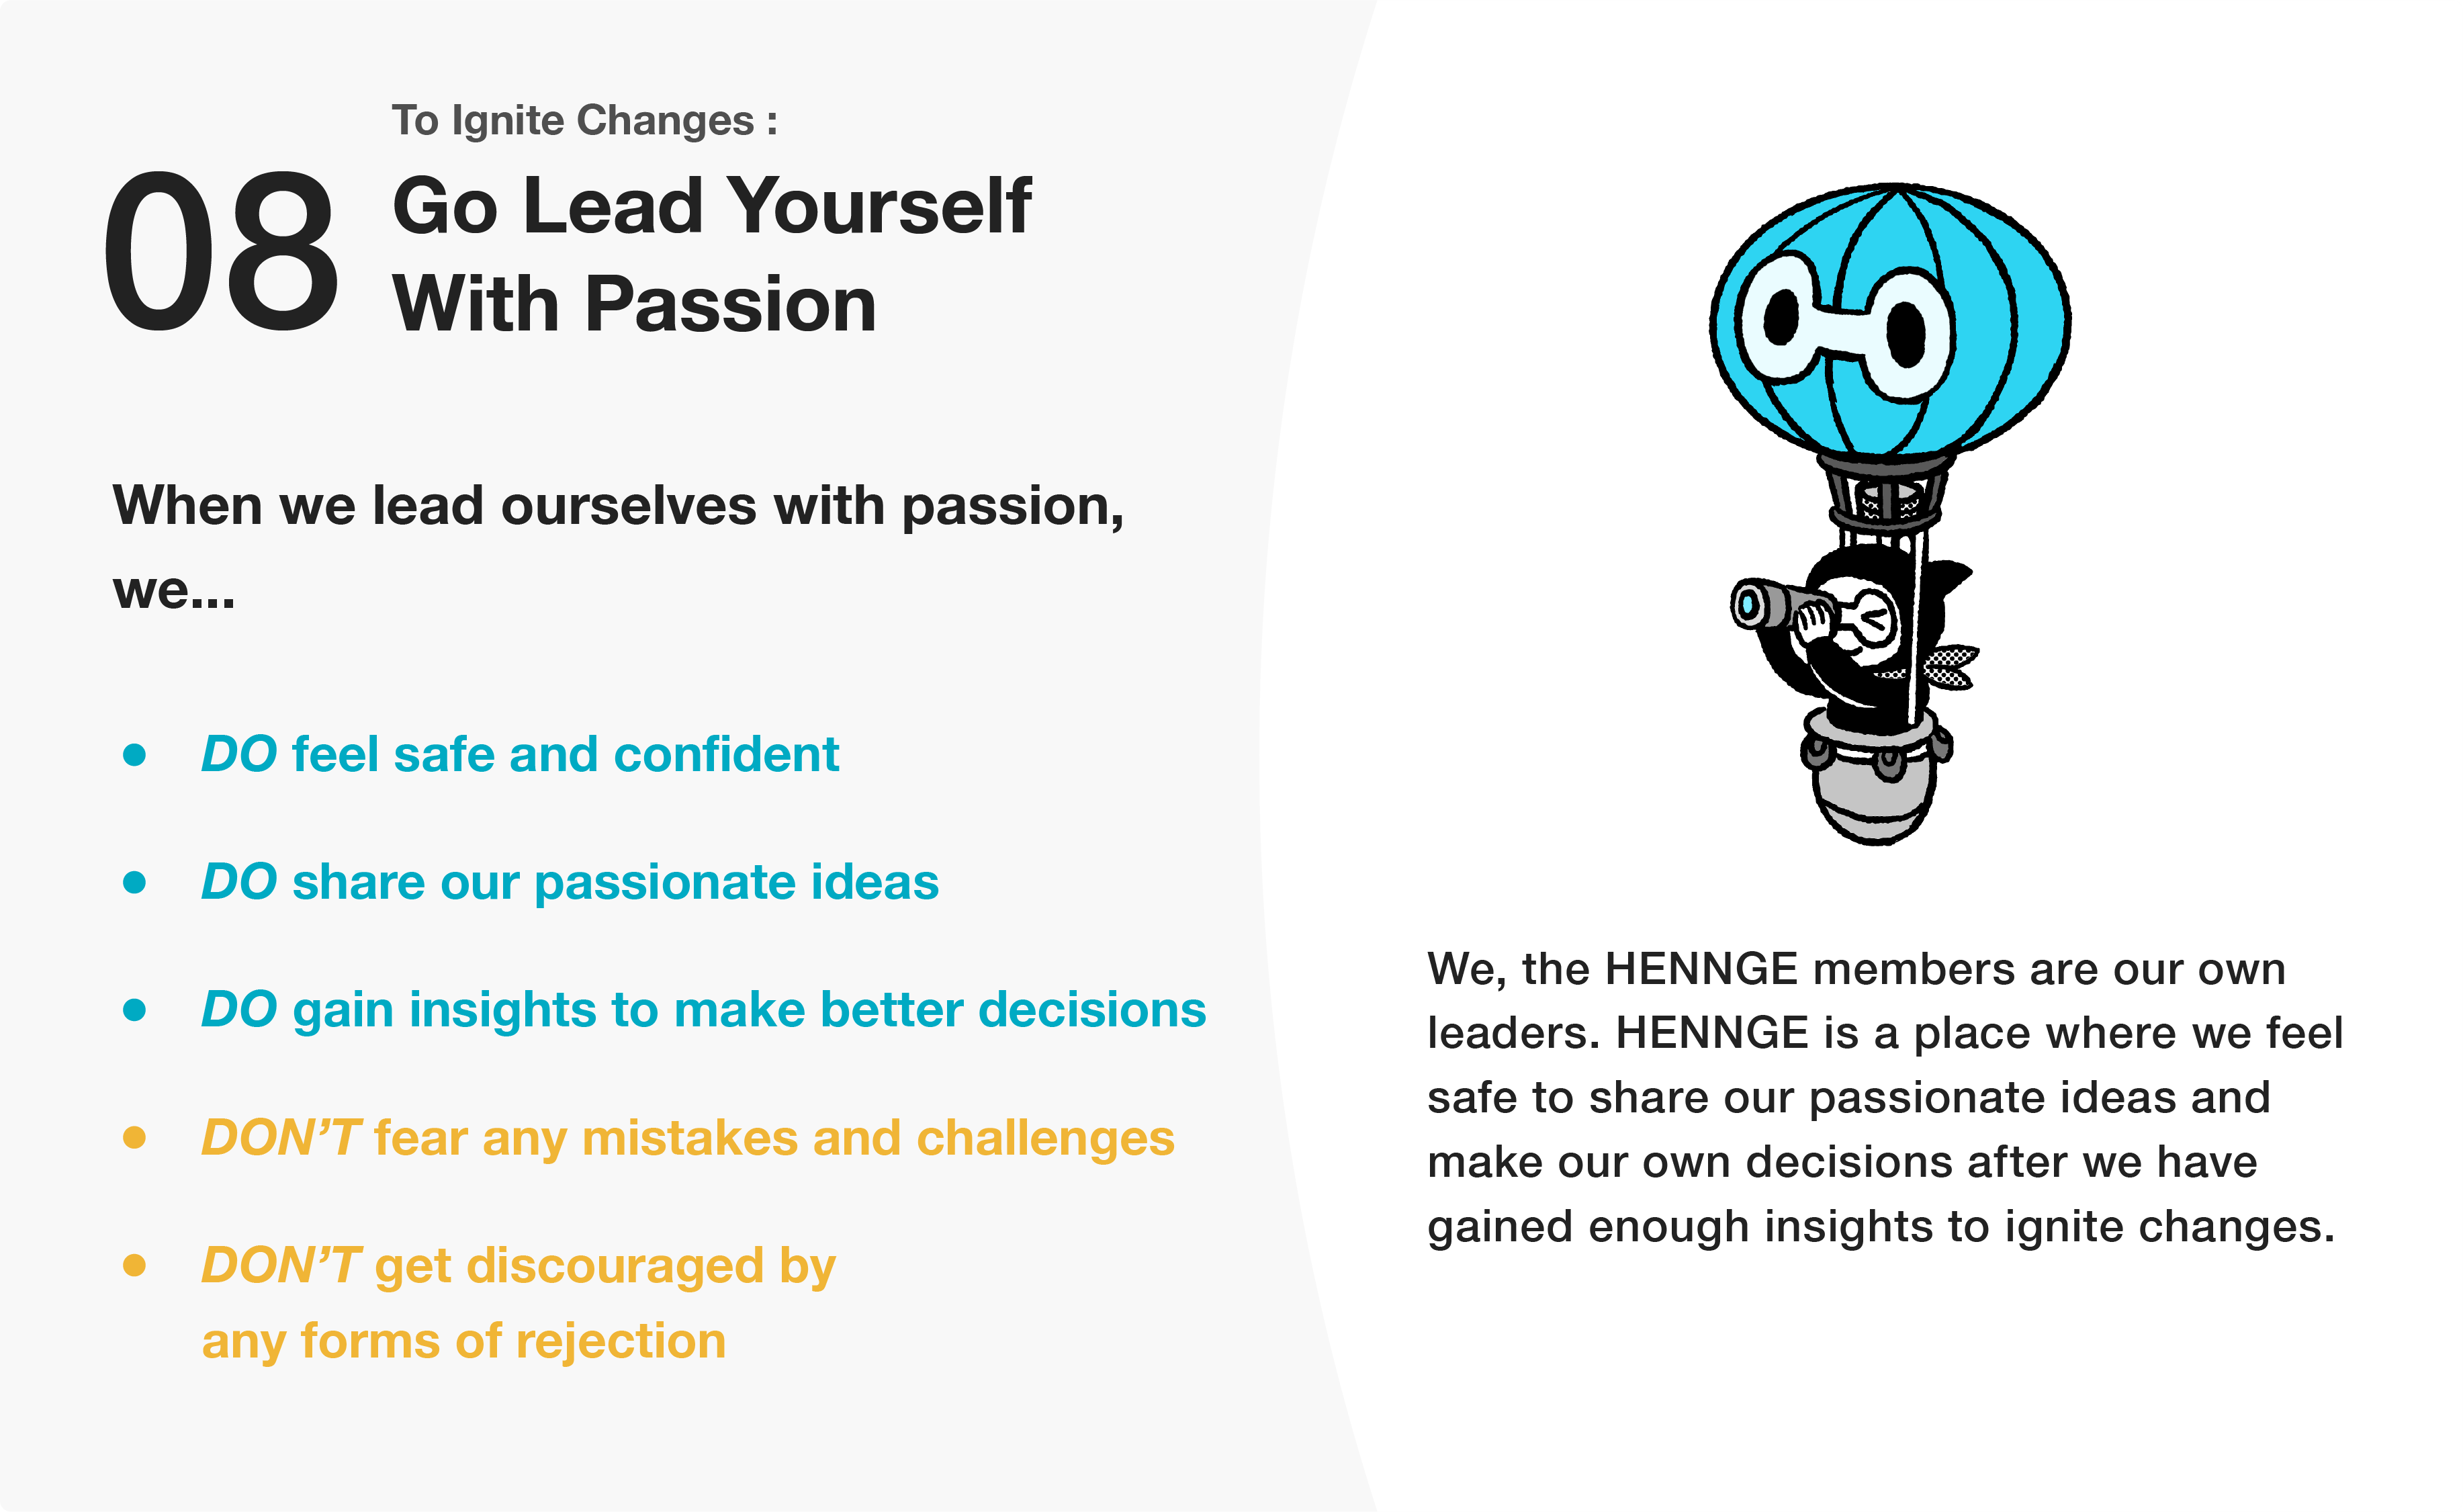 08 GO LEAD YOURSELF WITH PASSION